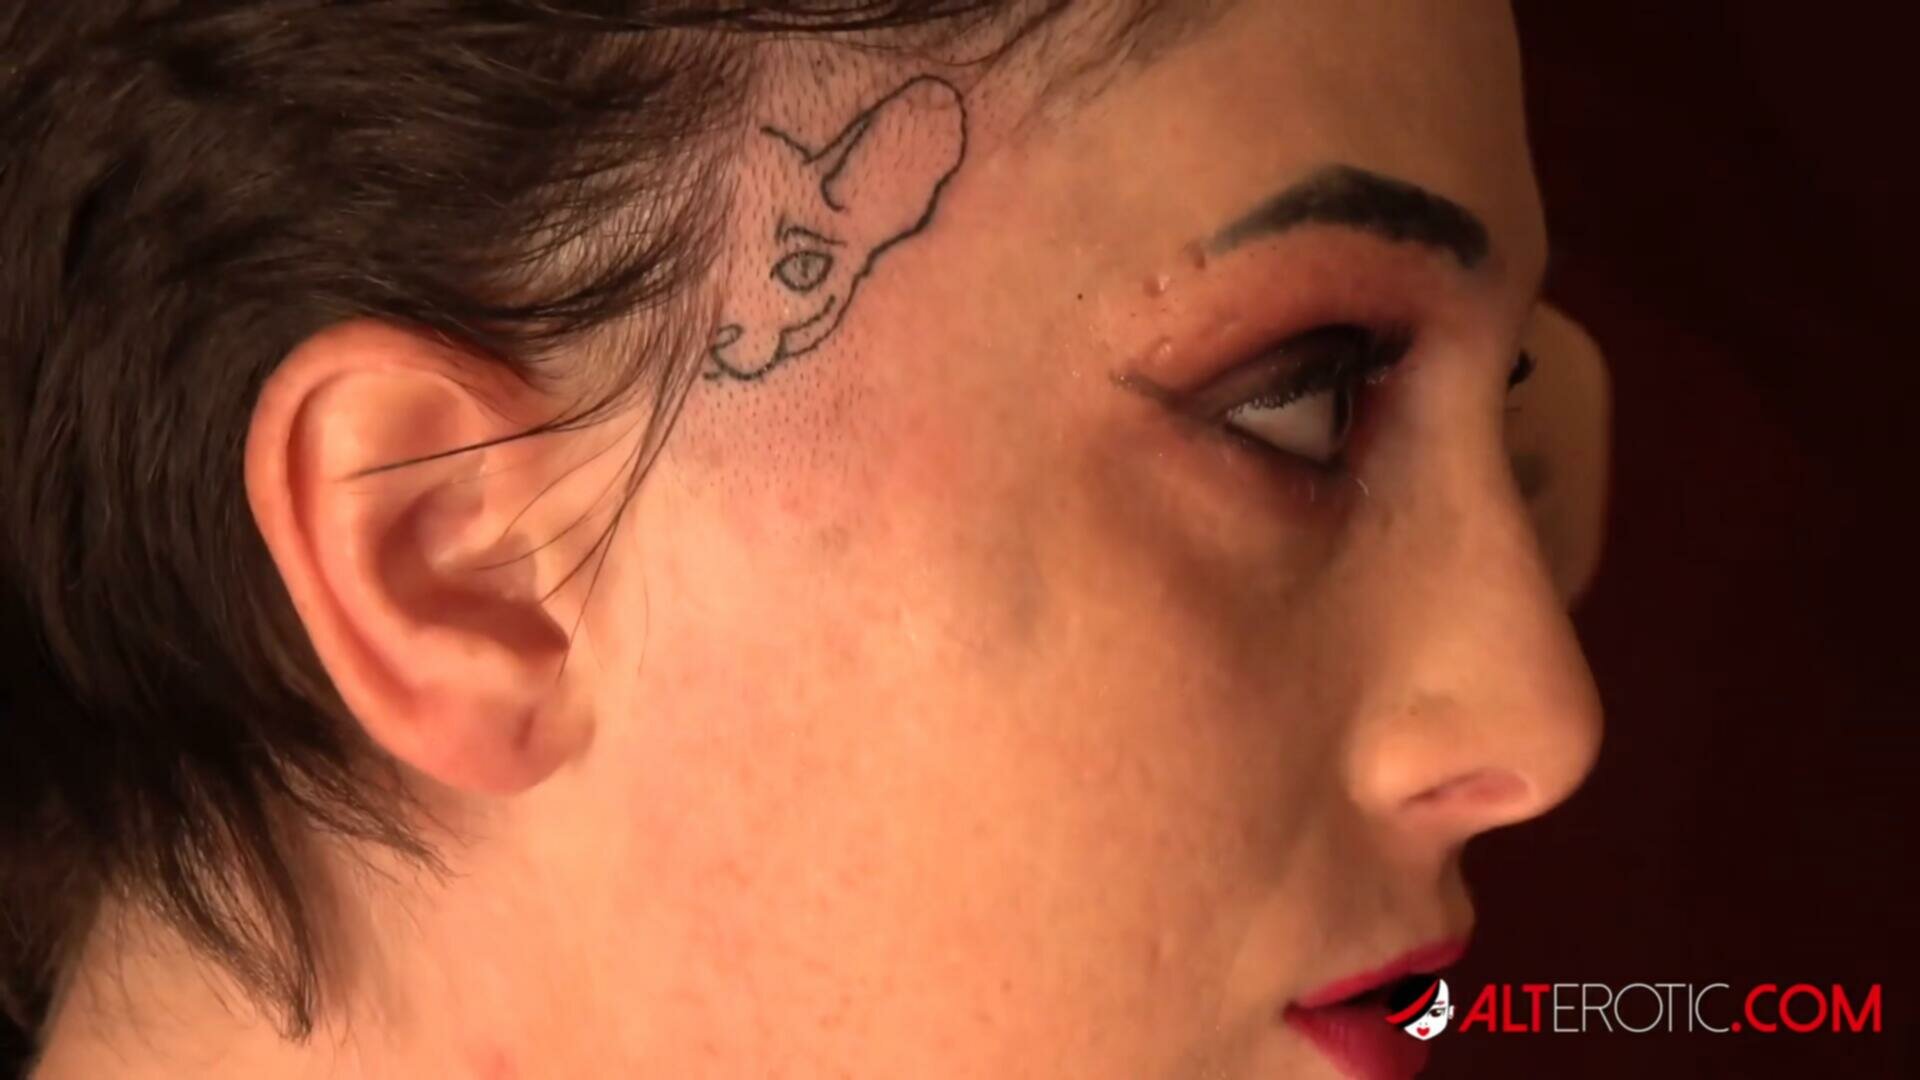 AltErotic 20 02 28 Sully Savage Facefucked While Having A Face Tattoo XXX 1080p HEVC x265 PRT XvX